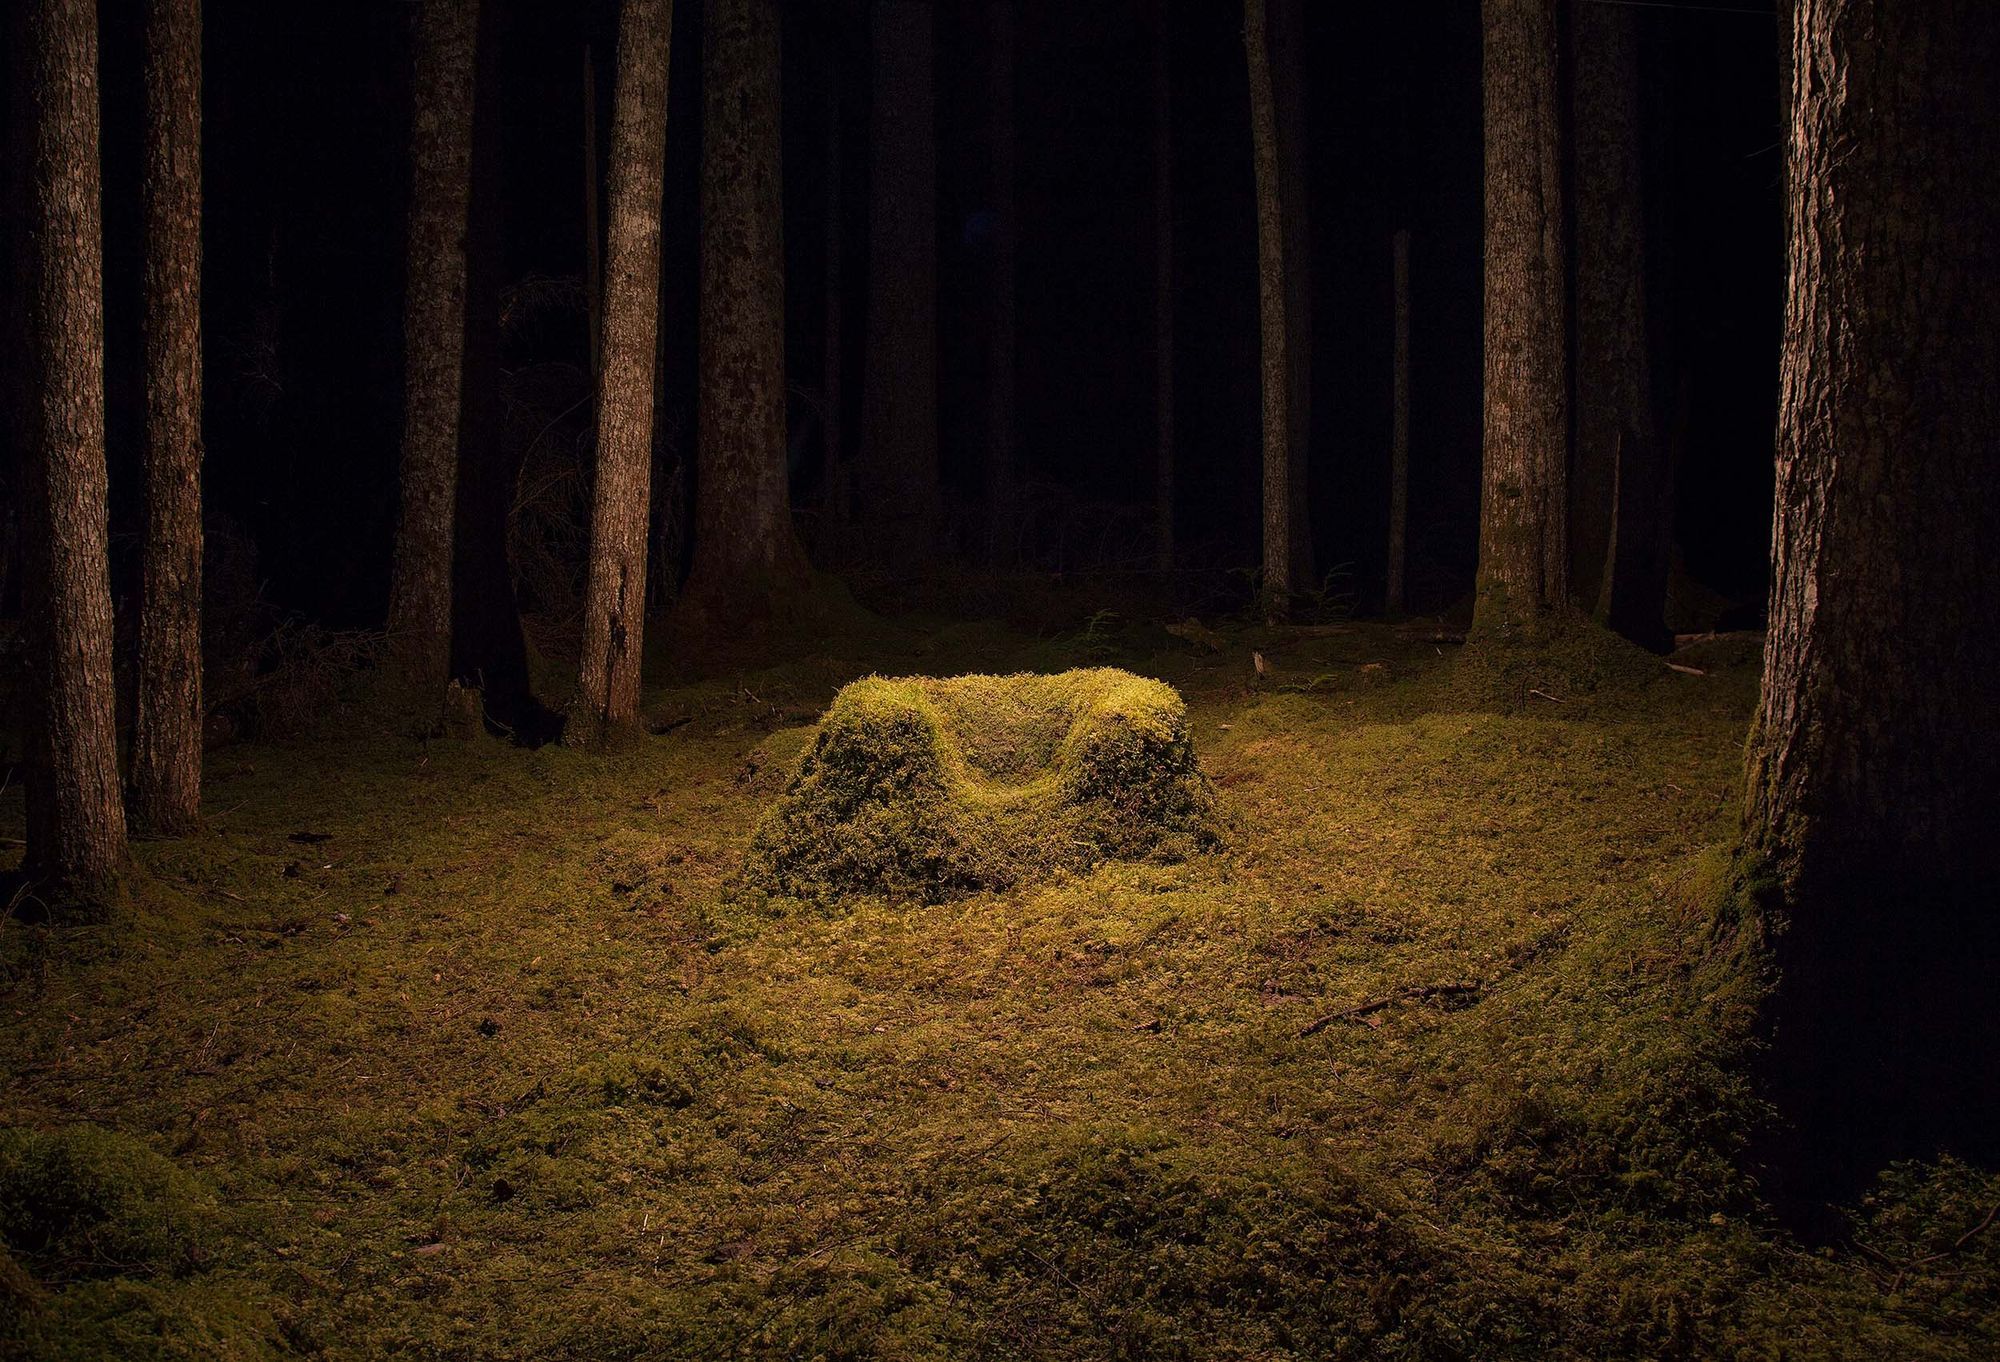 Photo: a moss-covered armchair lit up amidst a moss-covered clearing between trees and dark forest